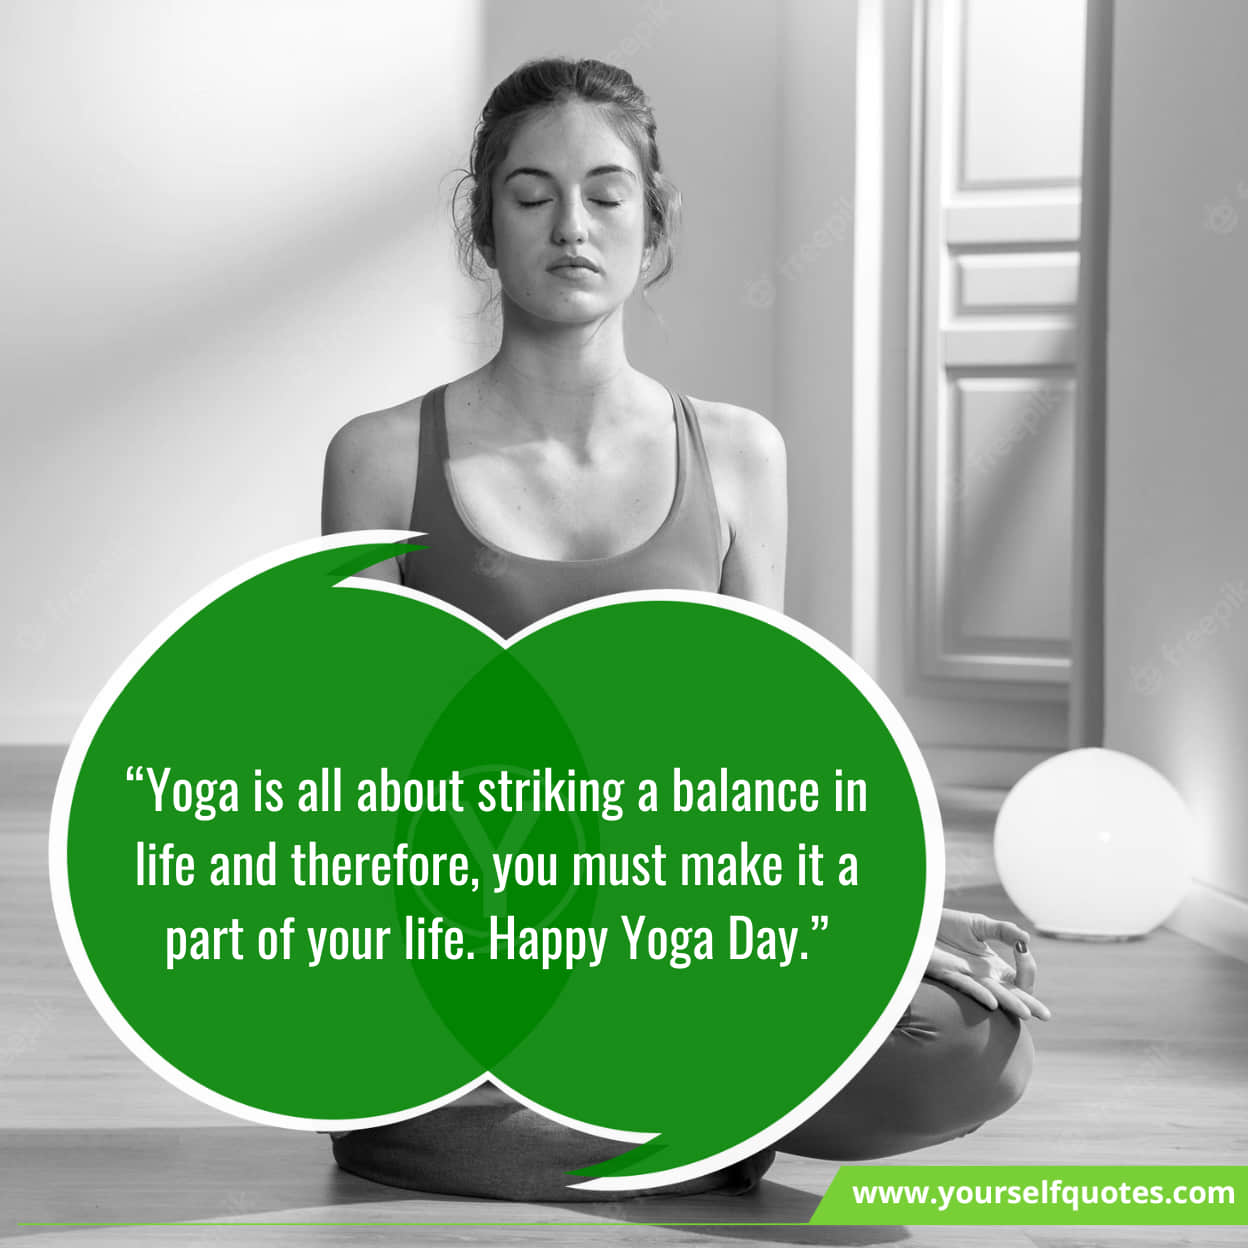 Messages & Slogans For World Yoga Day